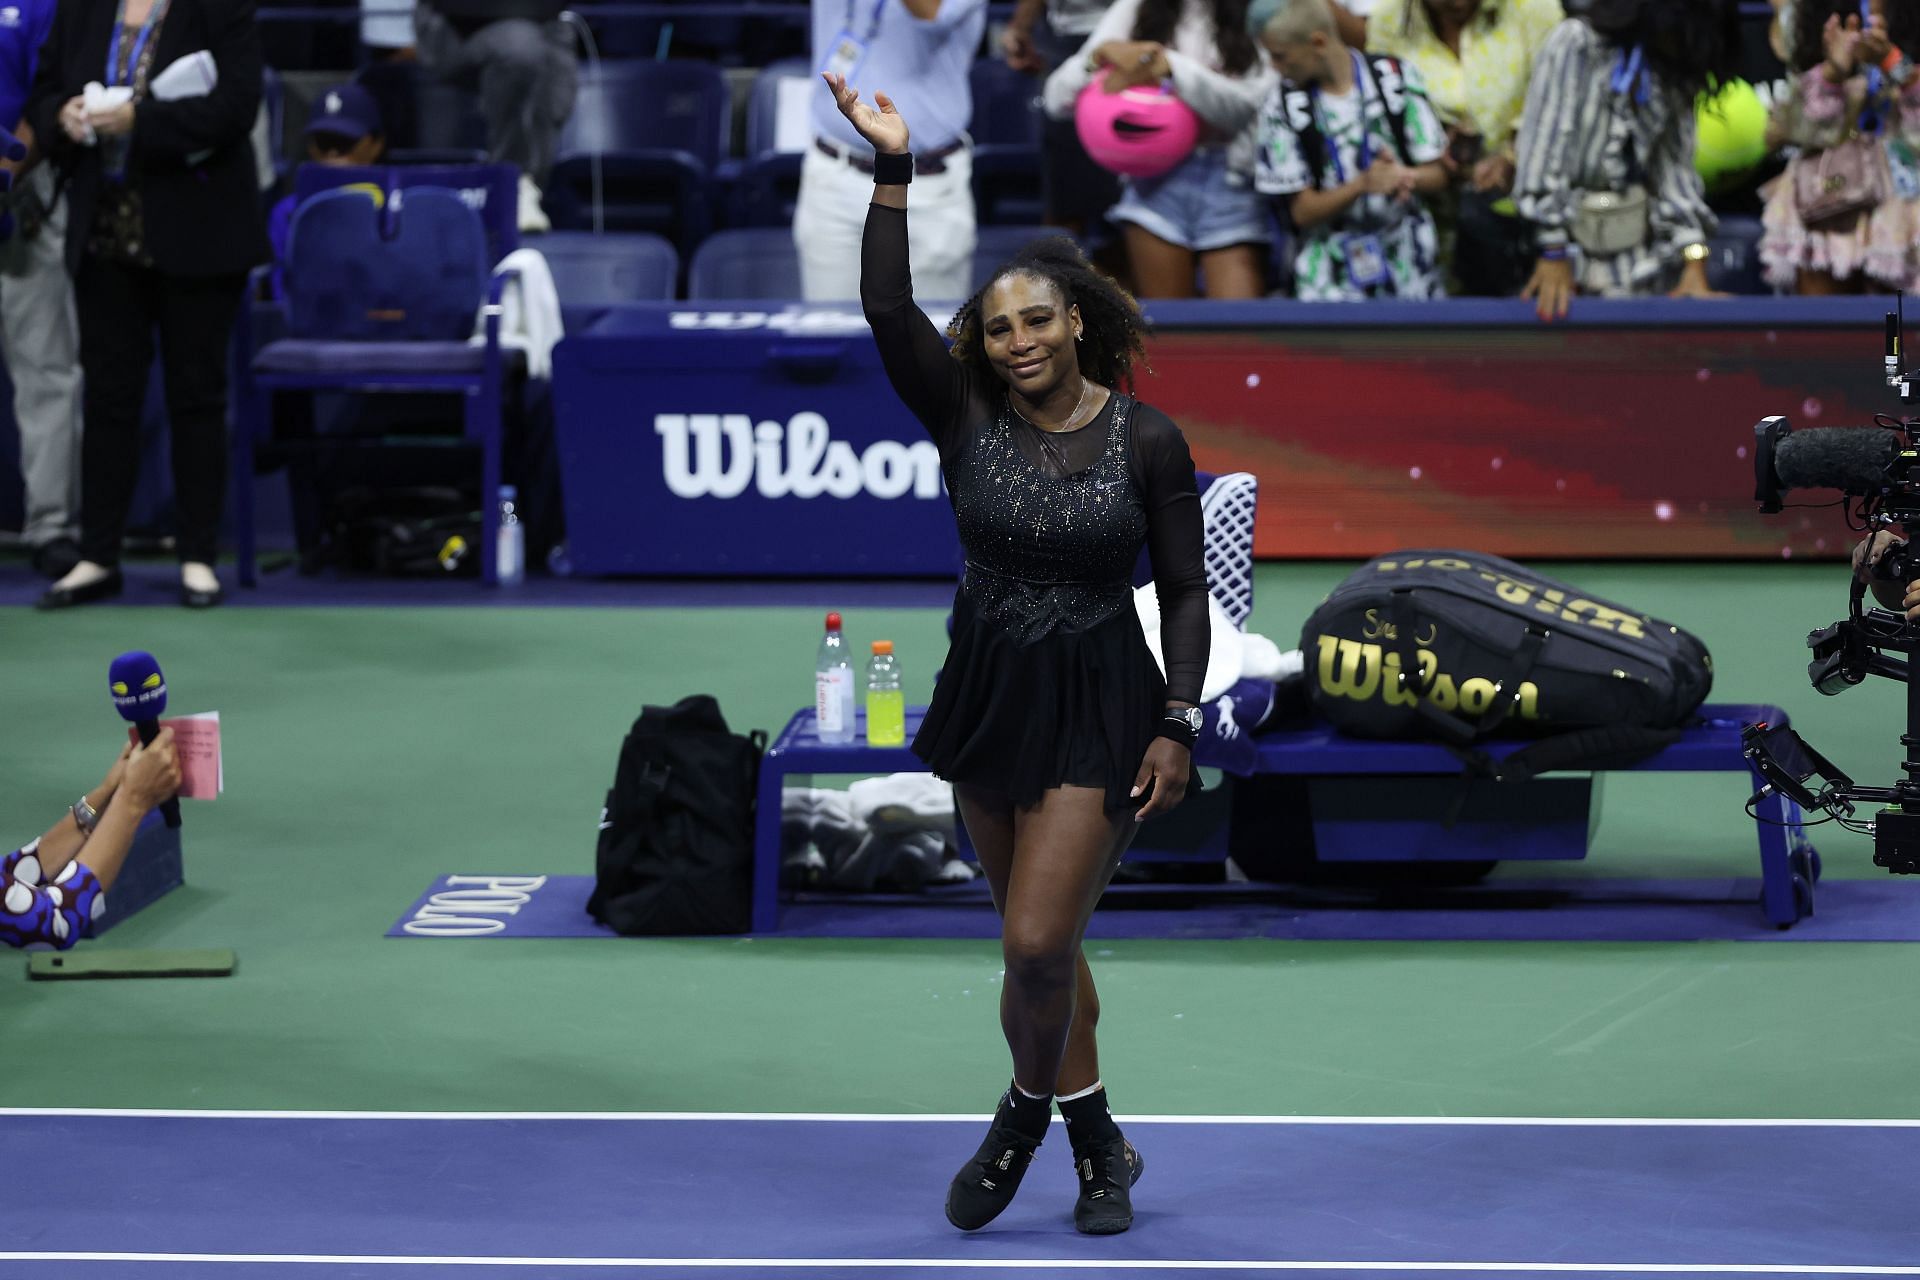 Serena Williams waves to the Arthur Ashe Stadium crowd at the 2022 US Open